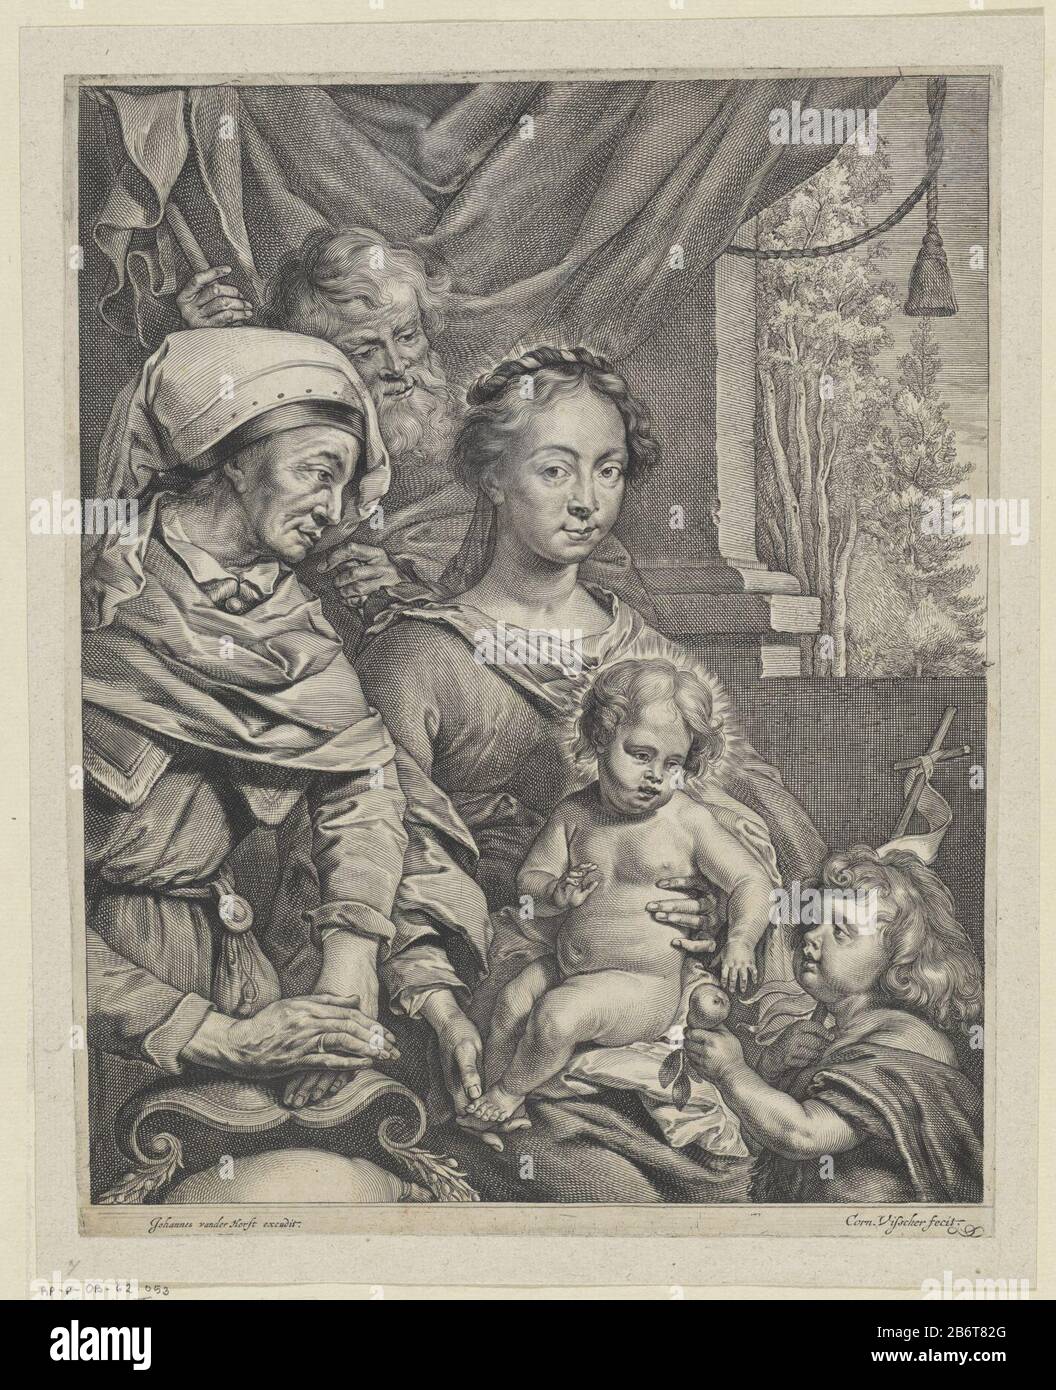 Heilige Familie met Elisabet en Johannes The Holy Family with Elizabeth and John the Baptist as a child. John, ha in his hand a standard, represents the BC Child and hands him a peer aan. Manufacturer : print maker: Cornelis Visscher (II) (referred to on object) to a design of: Jacopo Palma (il Vecchio) (possible) publisher: John van der Horst (listed property) Place manufacture: Haarlem Dating: 1638 - 1658 Physical features: engra and etching material: paper Technique: engra (printing process) / etch dimensions: sheet: h 299 mm × W 234 mm Subject: Holy Family with John the Baptist (pbuh child Stock Photo